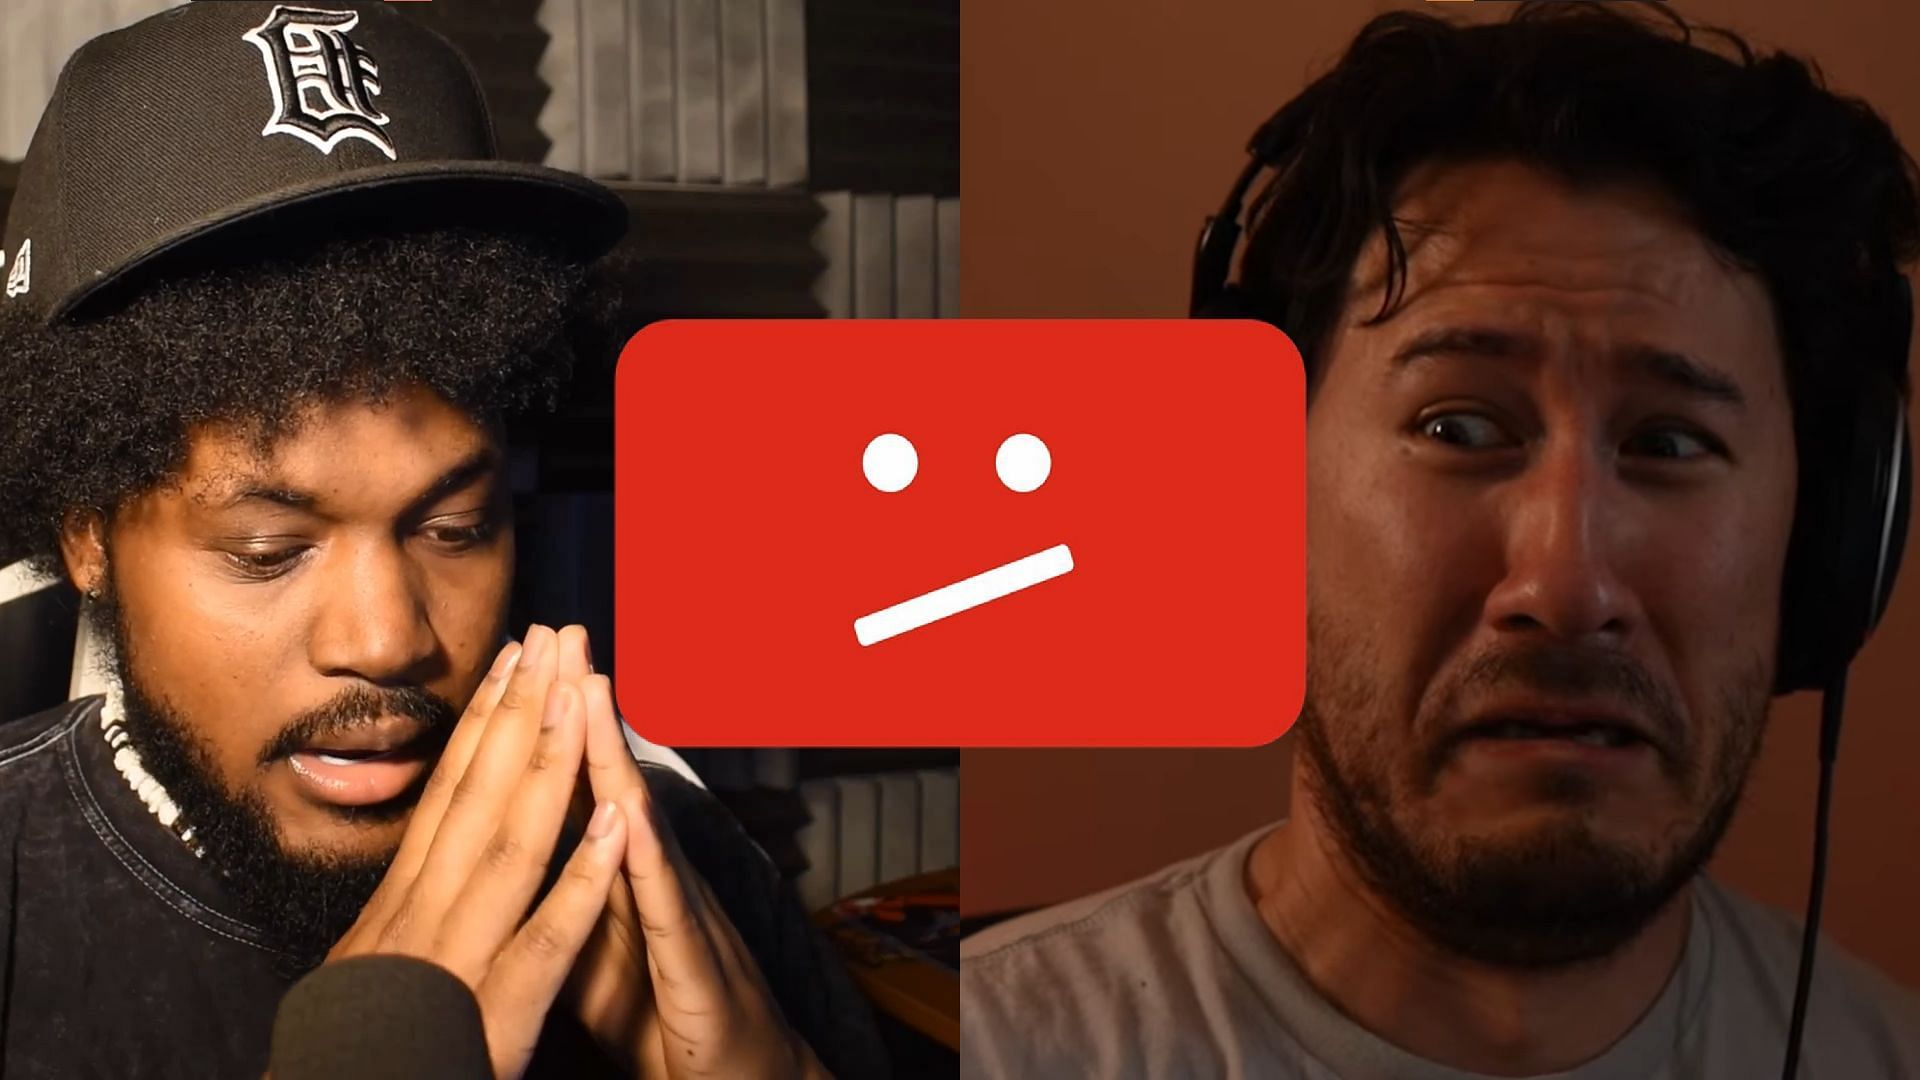 Markiplier uploads sussy video in support of Coryxkevin